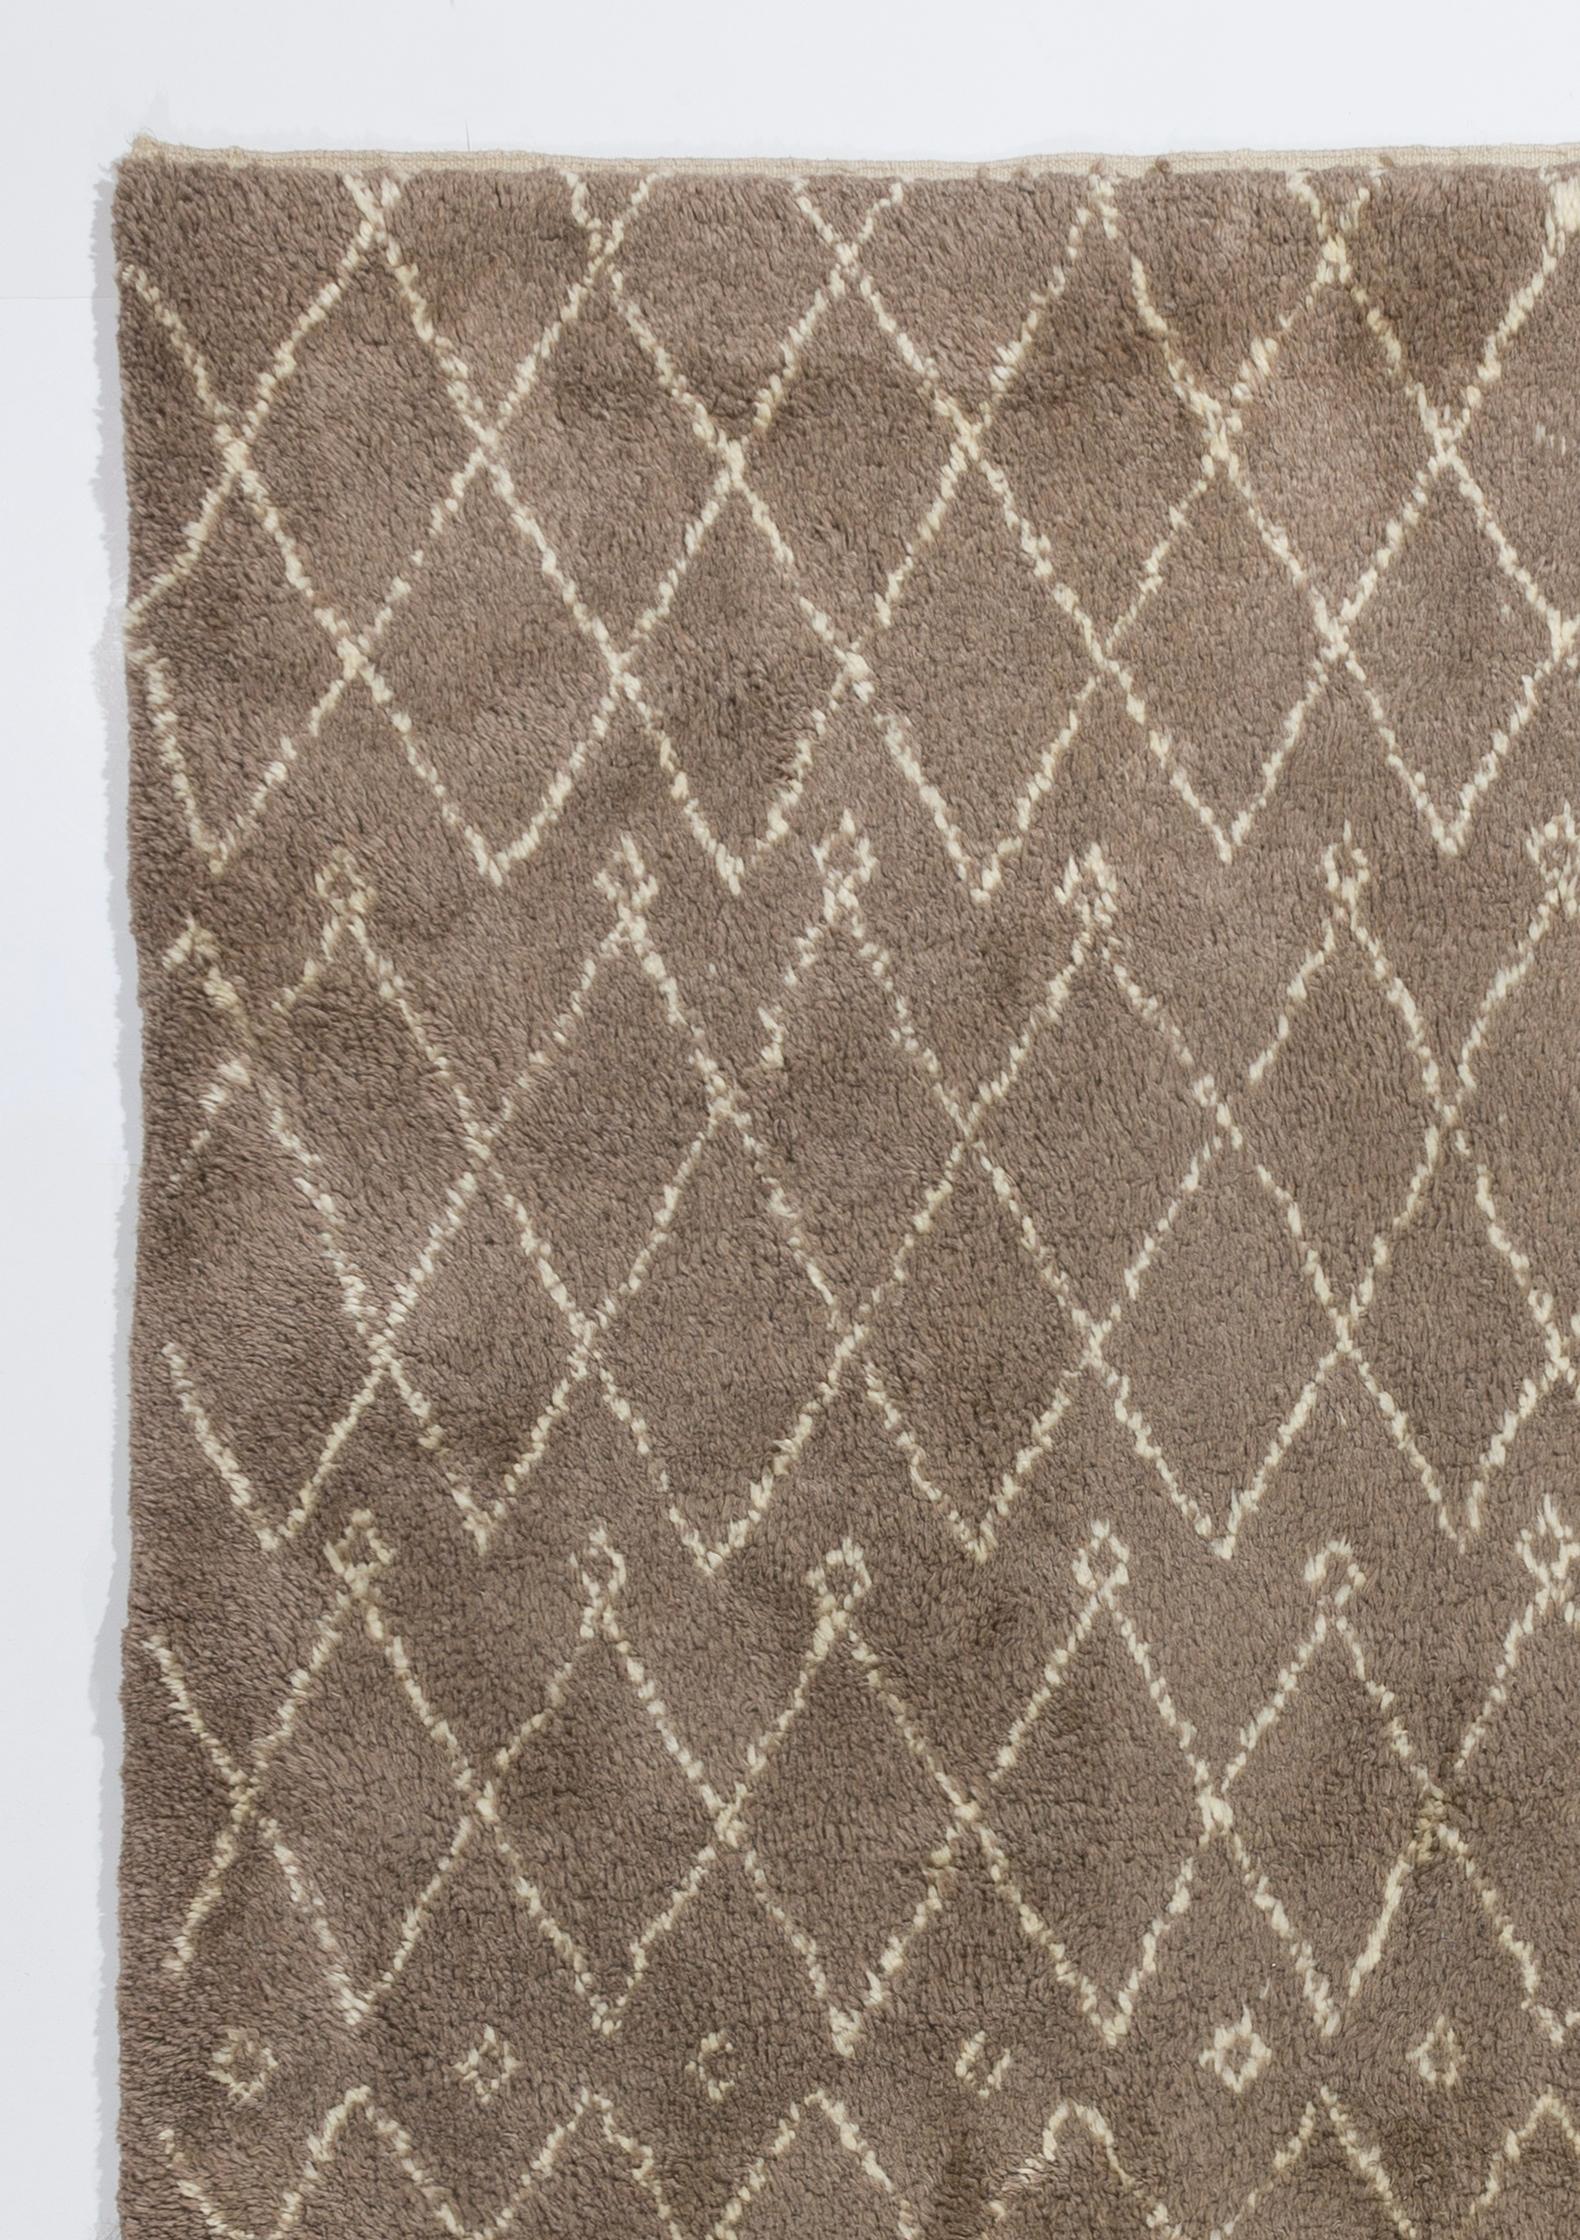 A quietly beautiful Moroccan rug featuring interlocking ivory lozenges on a latte background. Handwoven with soft natural un-dyed lambswool, it has a thick and lush pile. It's soft, subdued colors make a fitting background for Minimalist and modern